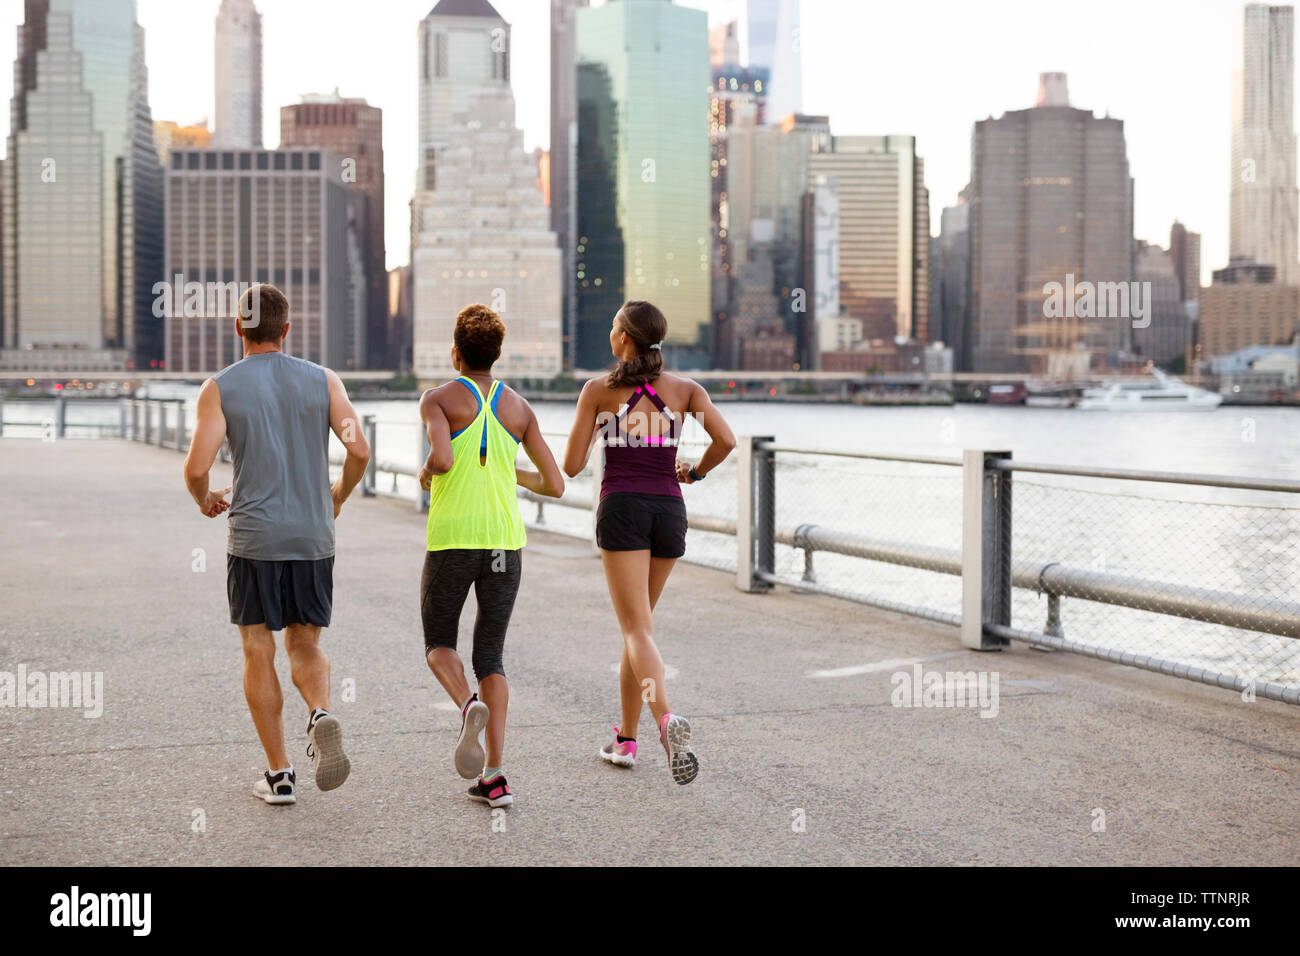 Athletes jogging on promenade by river Stock Photo